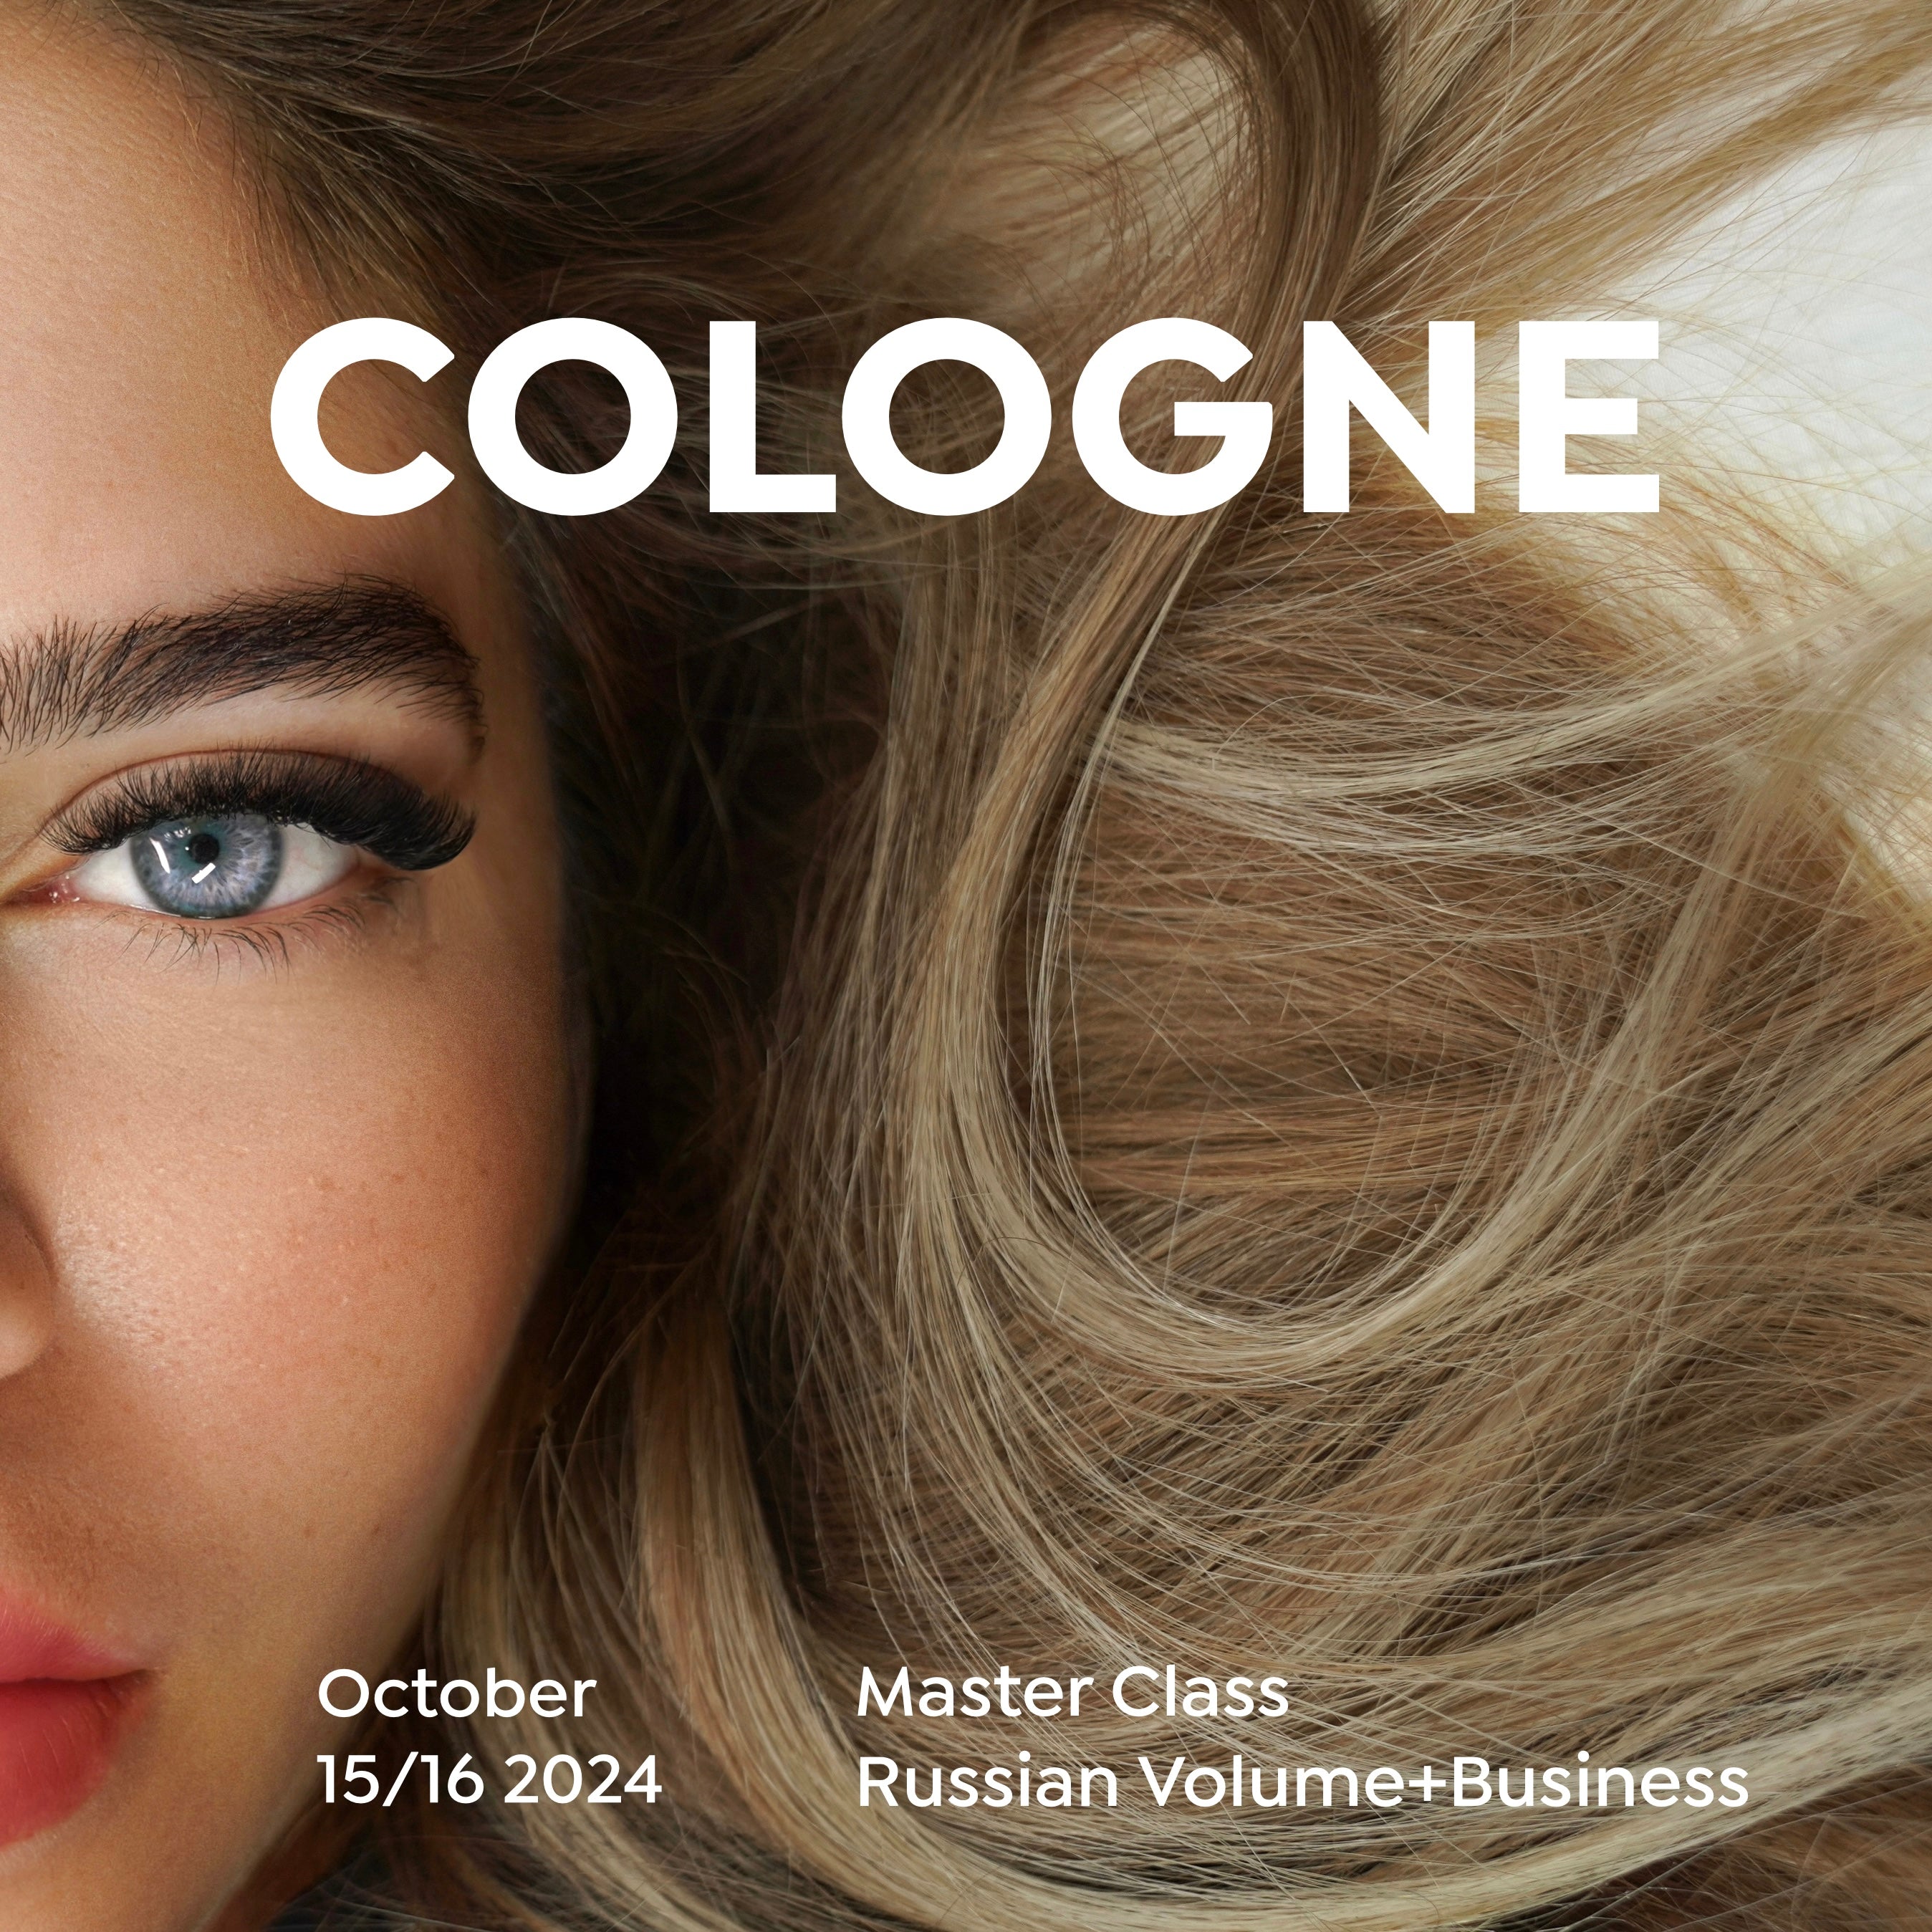 Volume Master Class, Cologne, Germany, October 15th-16th, 2024